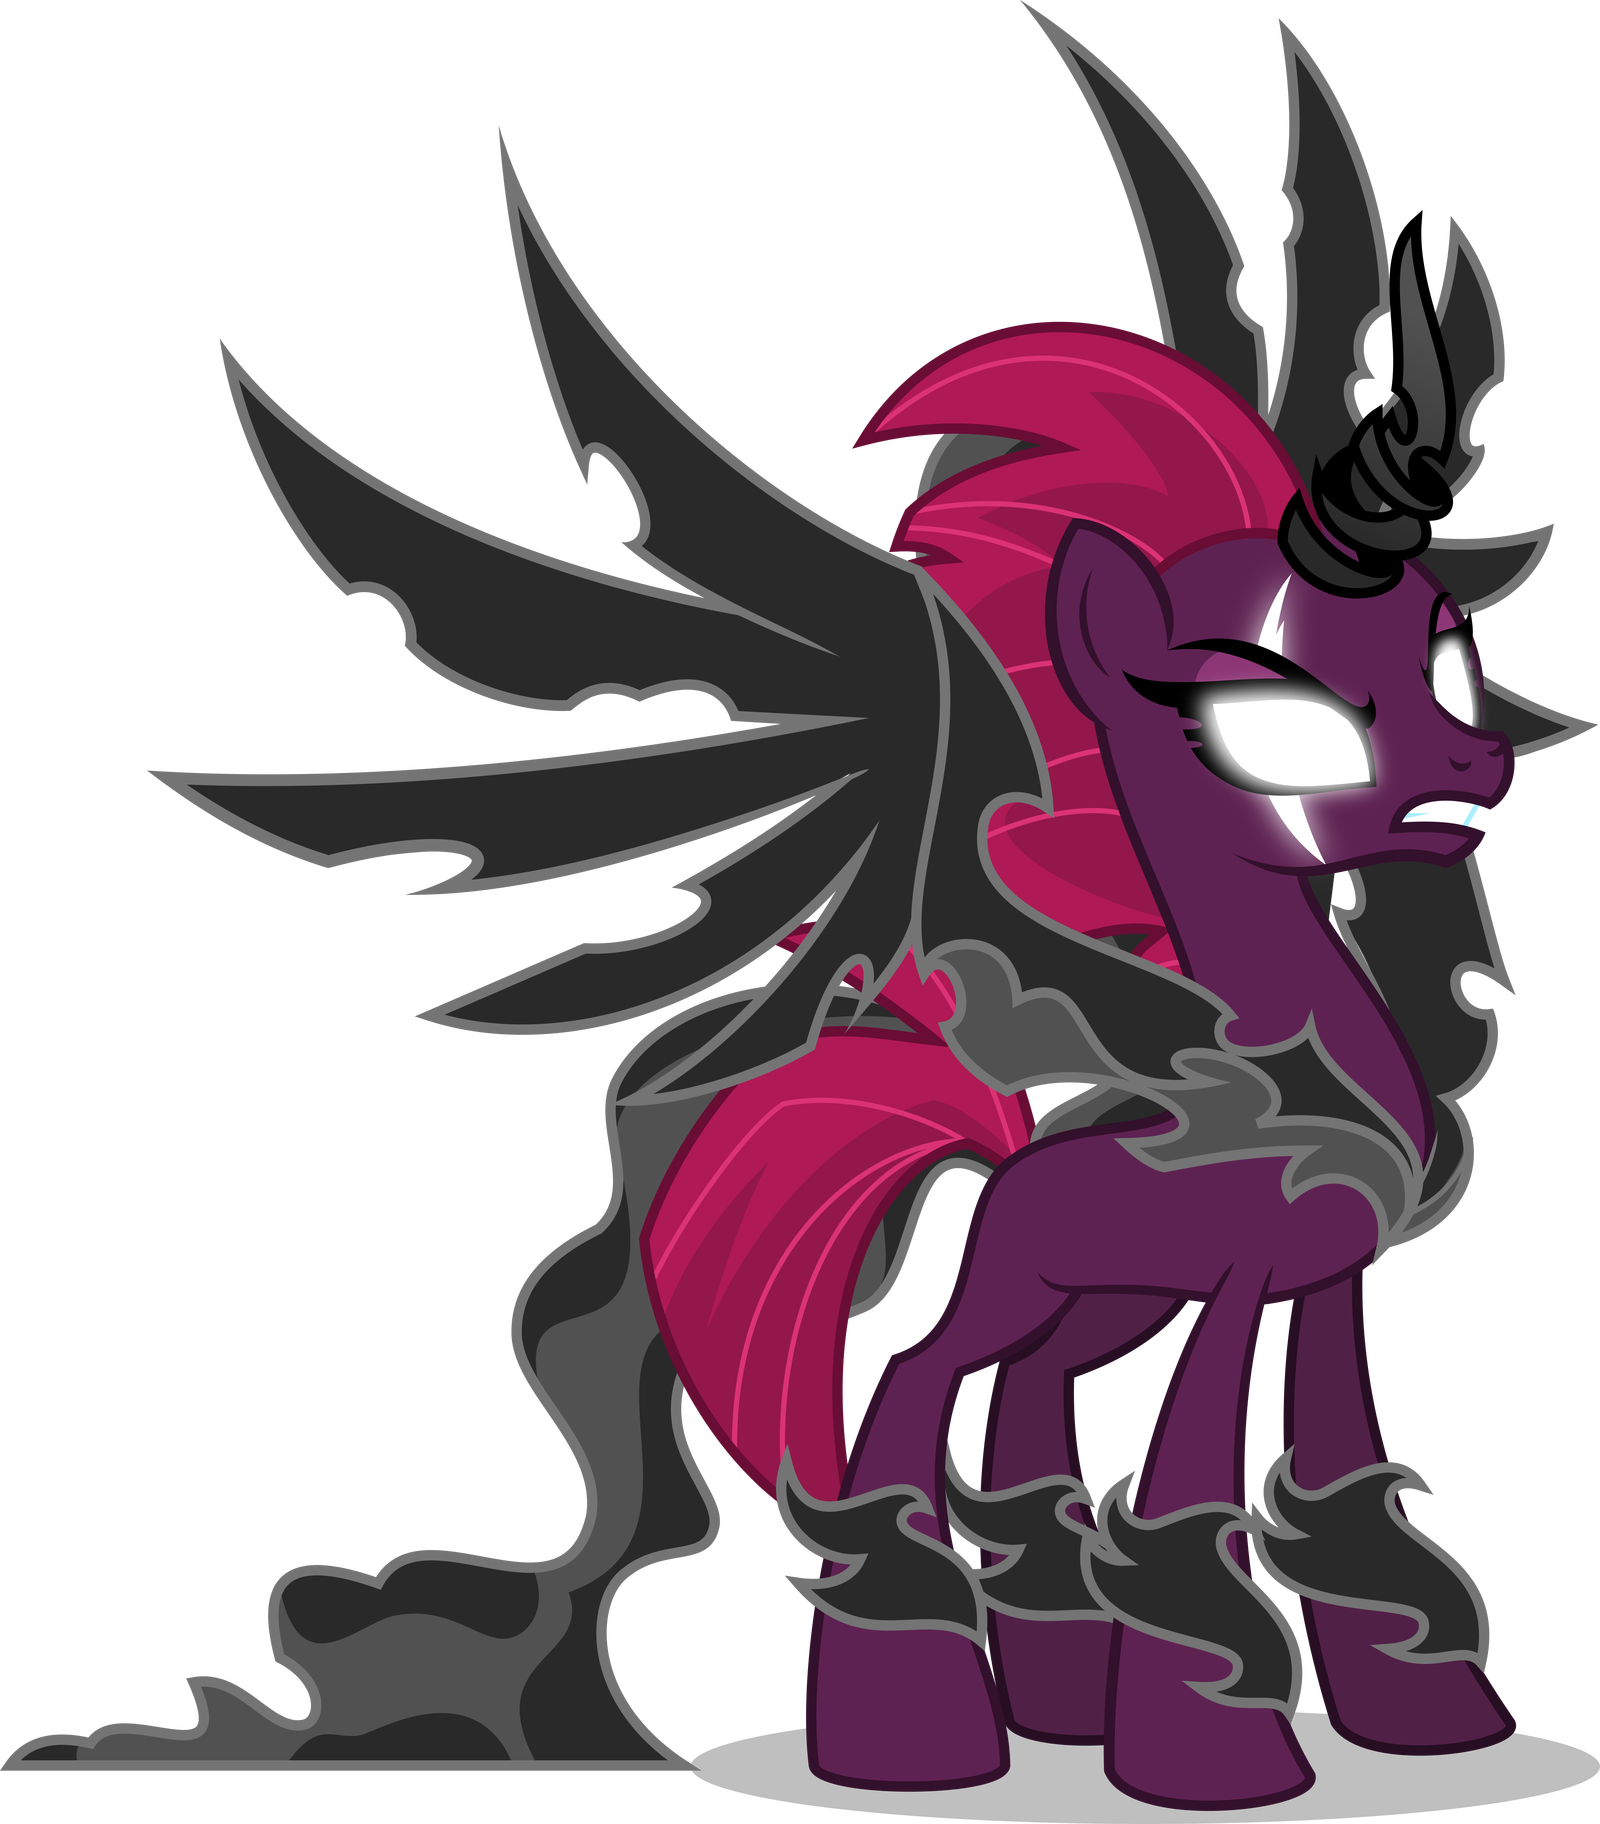 The tempest we lost - My little pony, Tempest shadow, Pony of Shadows